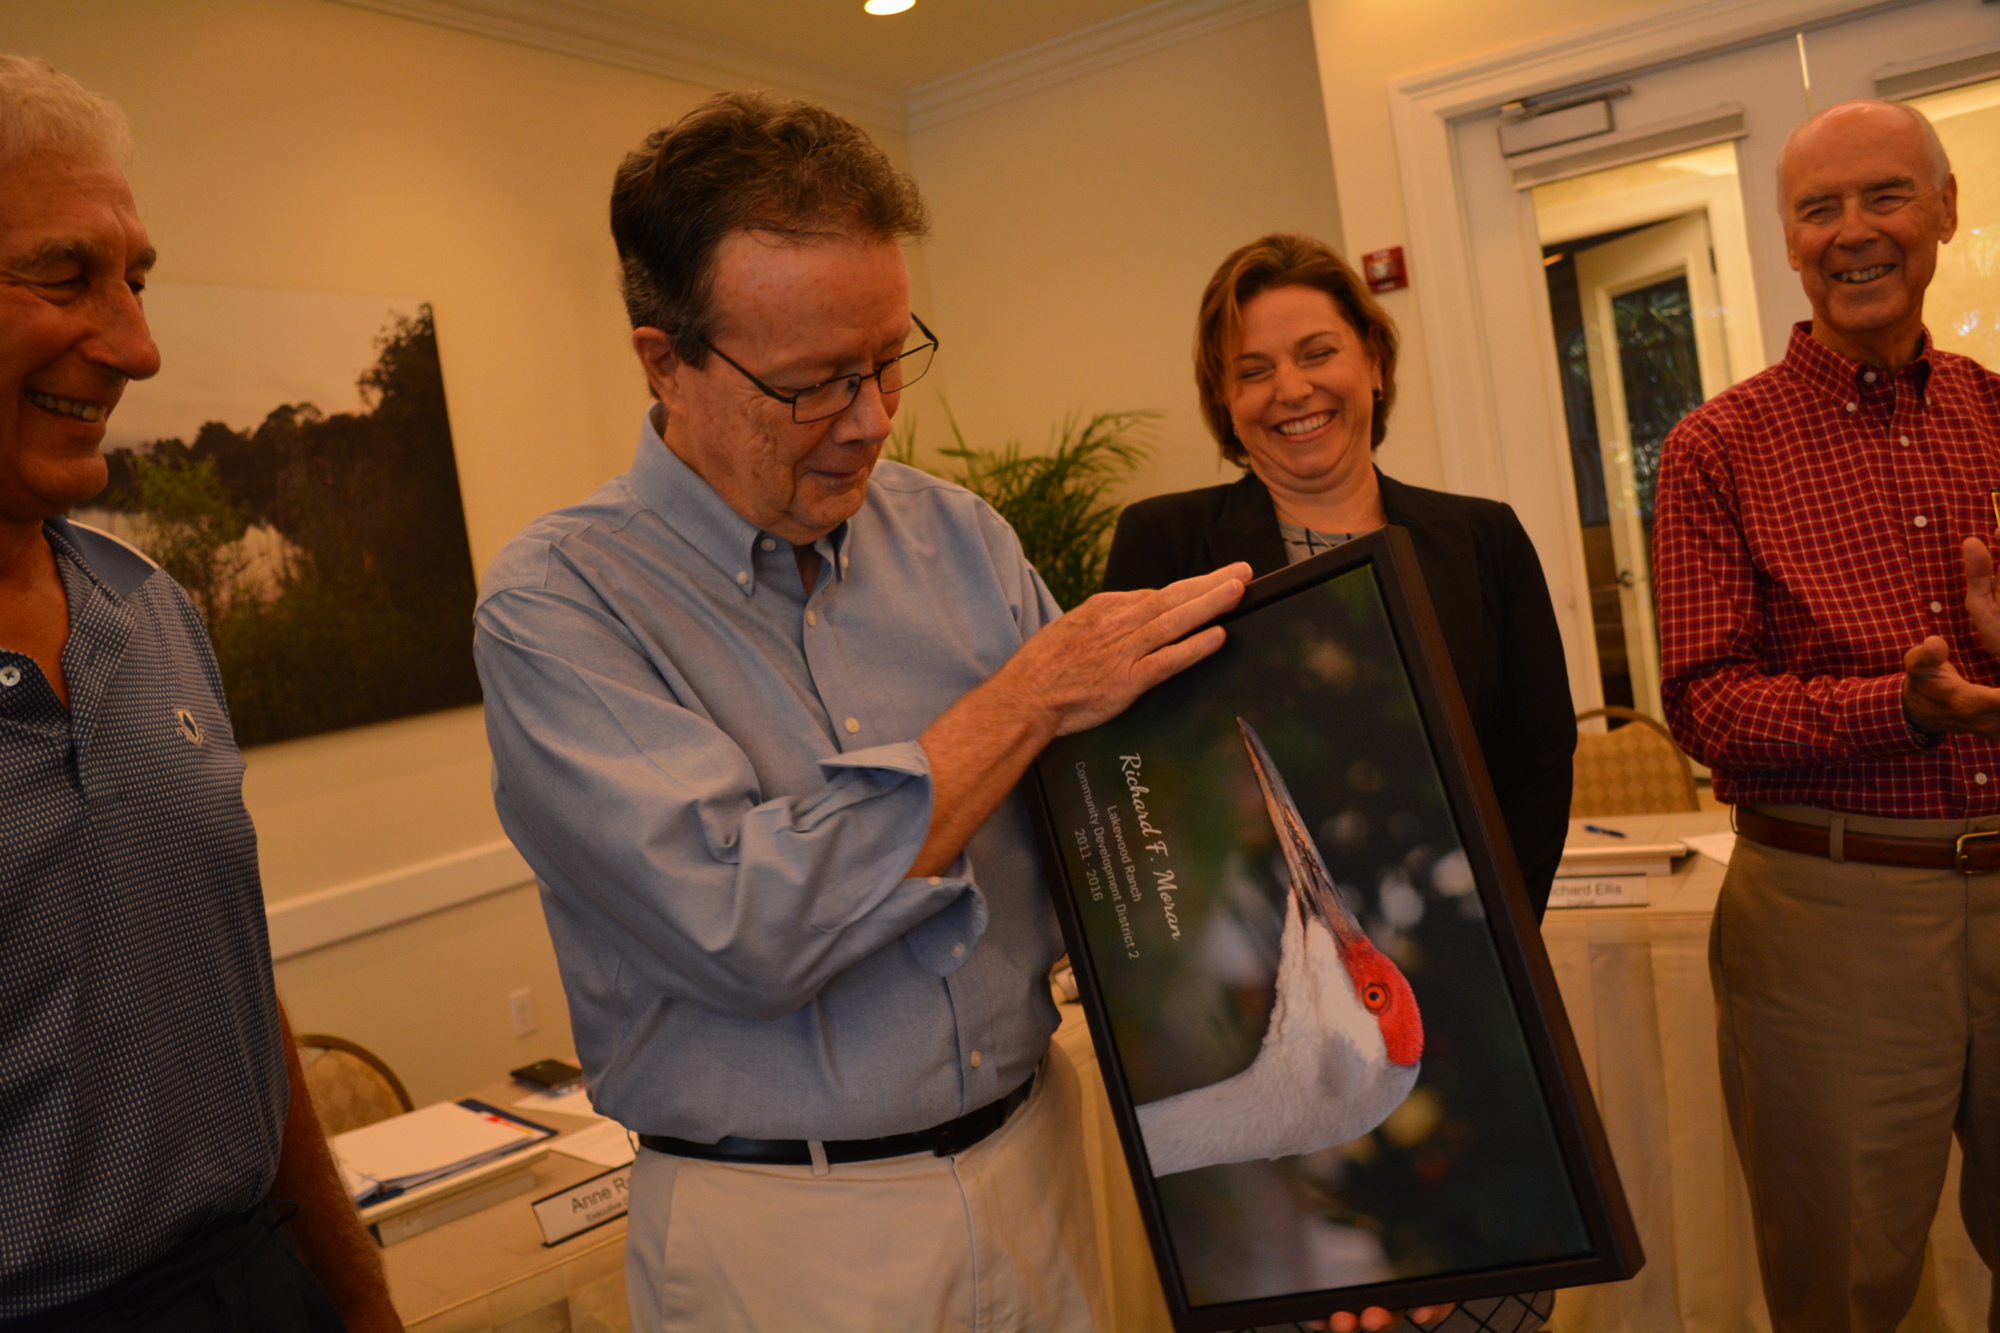 CDD 2 Supervisor Dick Moran accepts a gift — one of his photographs hanging at Lakewood Ranch Town Hall — from Town Hall Executive Director Anne Ross.